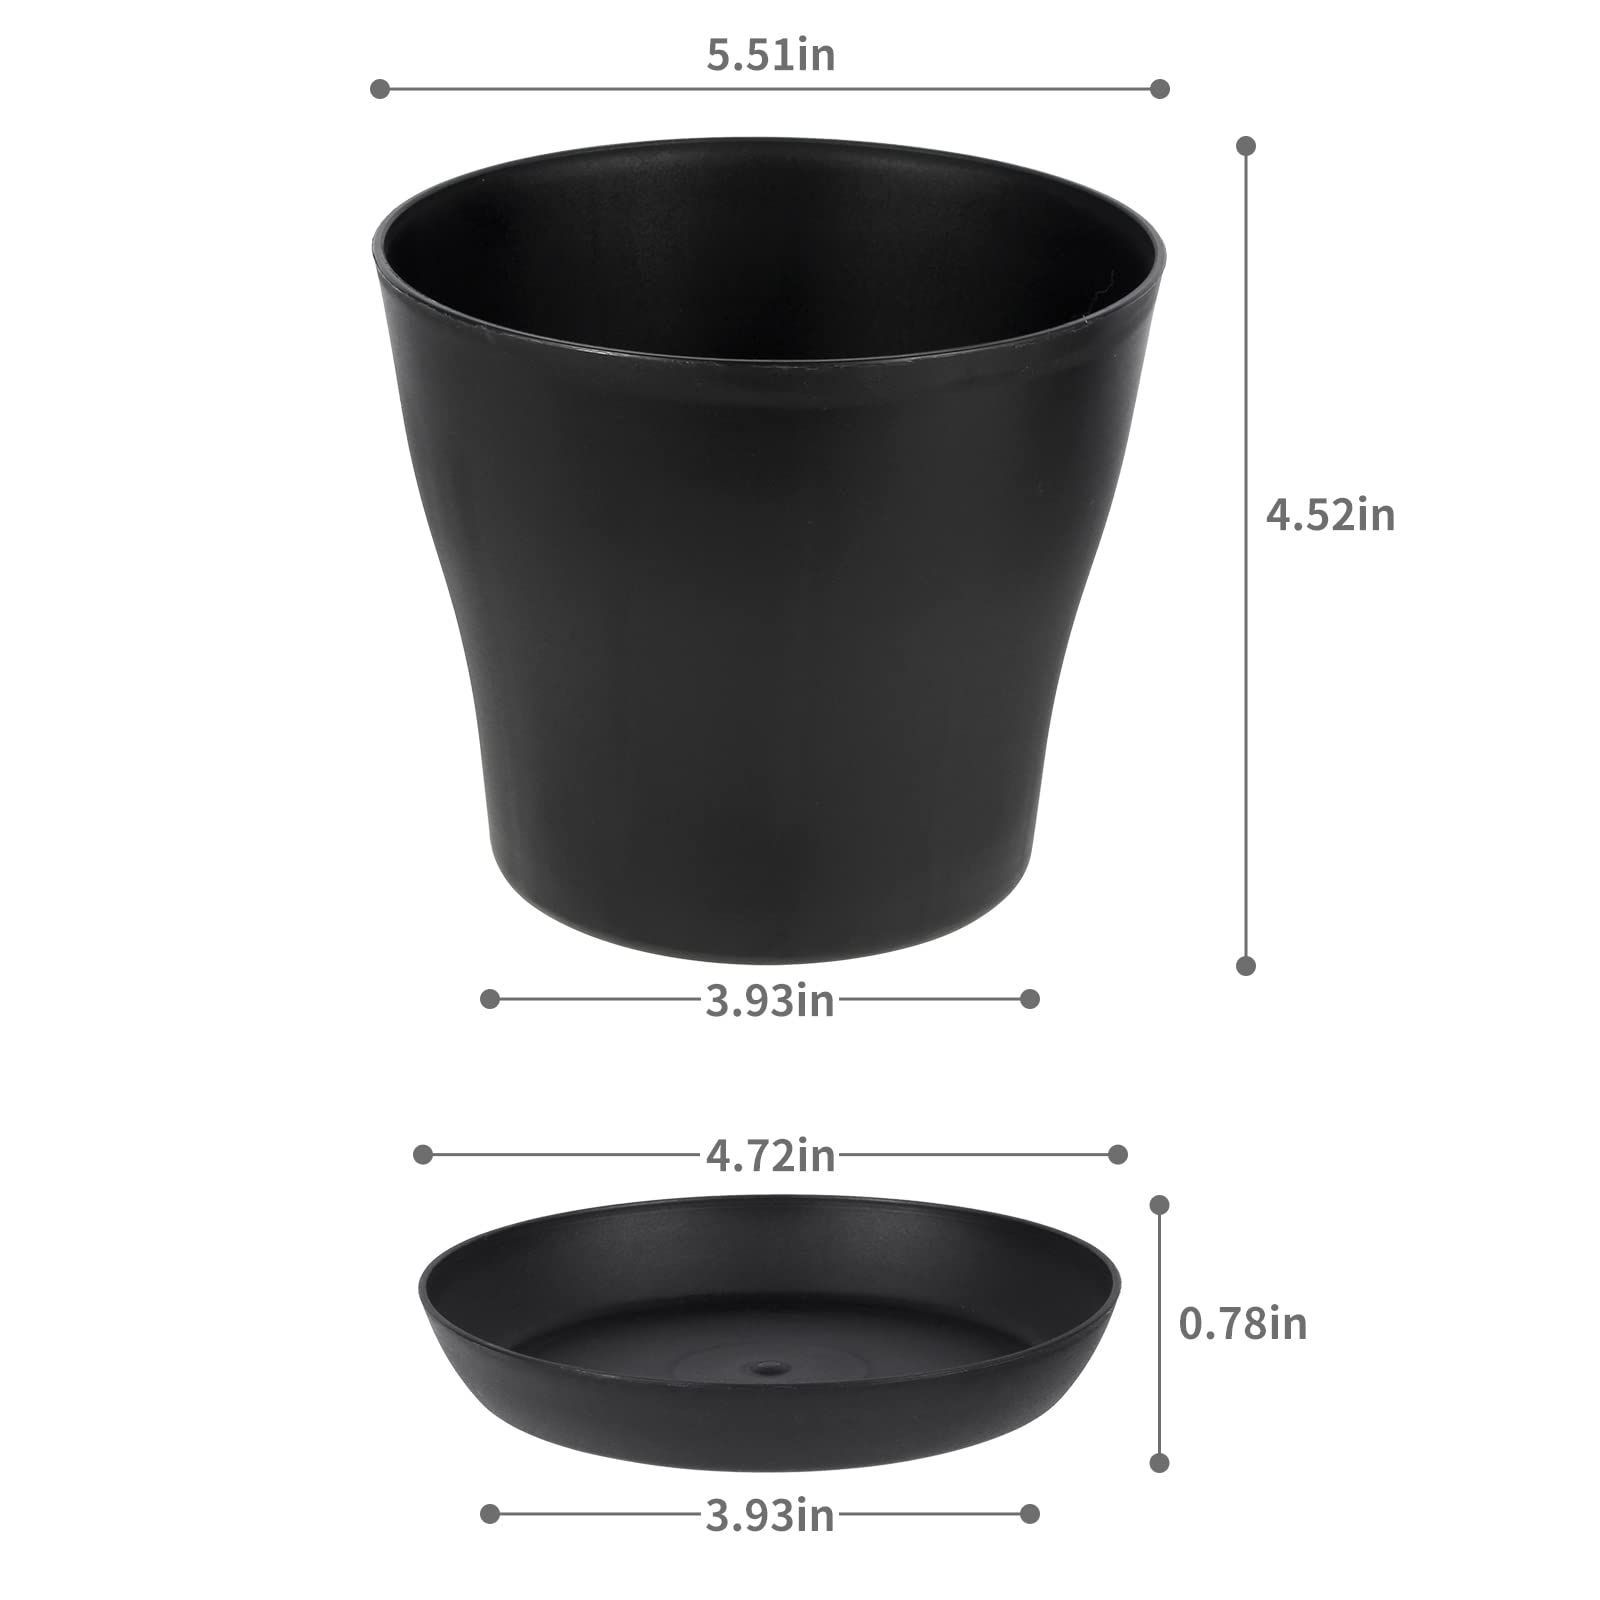 ruishetop 18 Pack 5.5 inch Plastic Flower Pot Indoor/Outdoor Decorative Plant Pots with Drainage Holes and Tray for Home Garden Plants Flowers Succulents Cactus (Black)